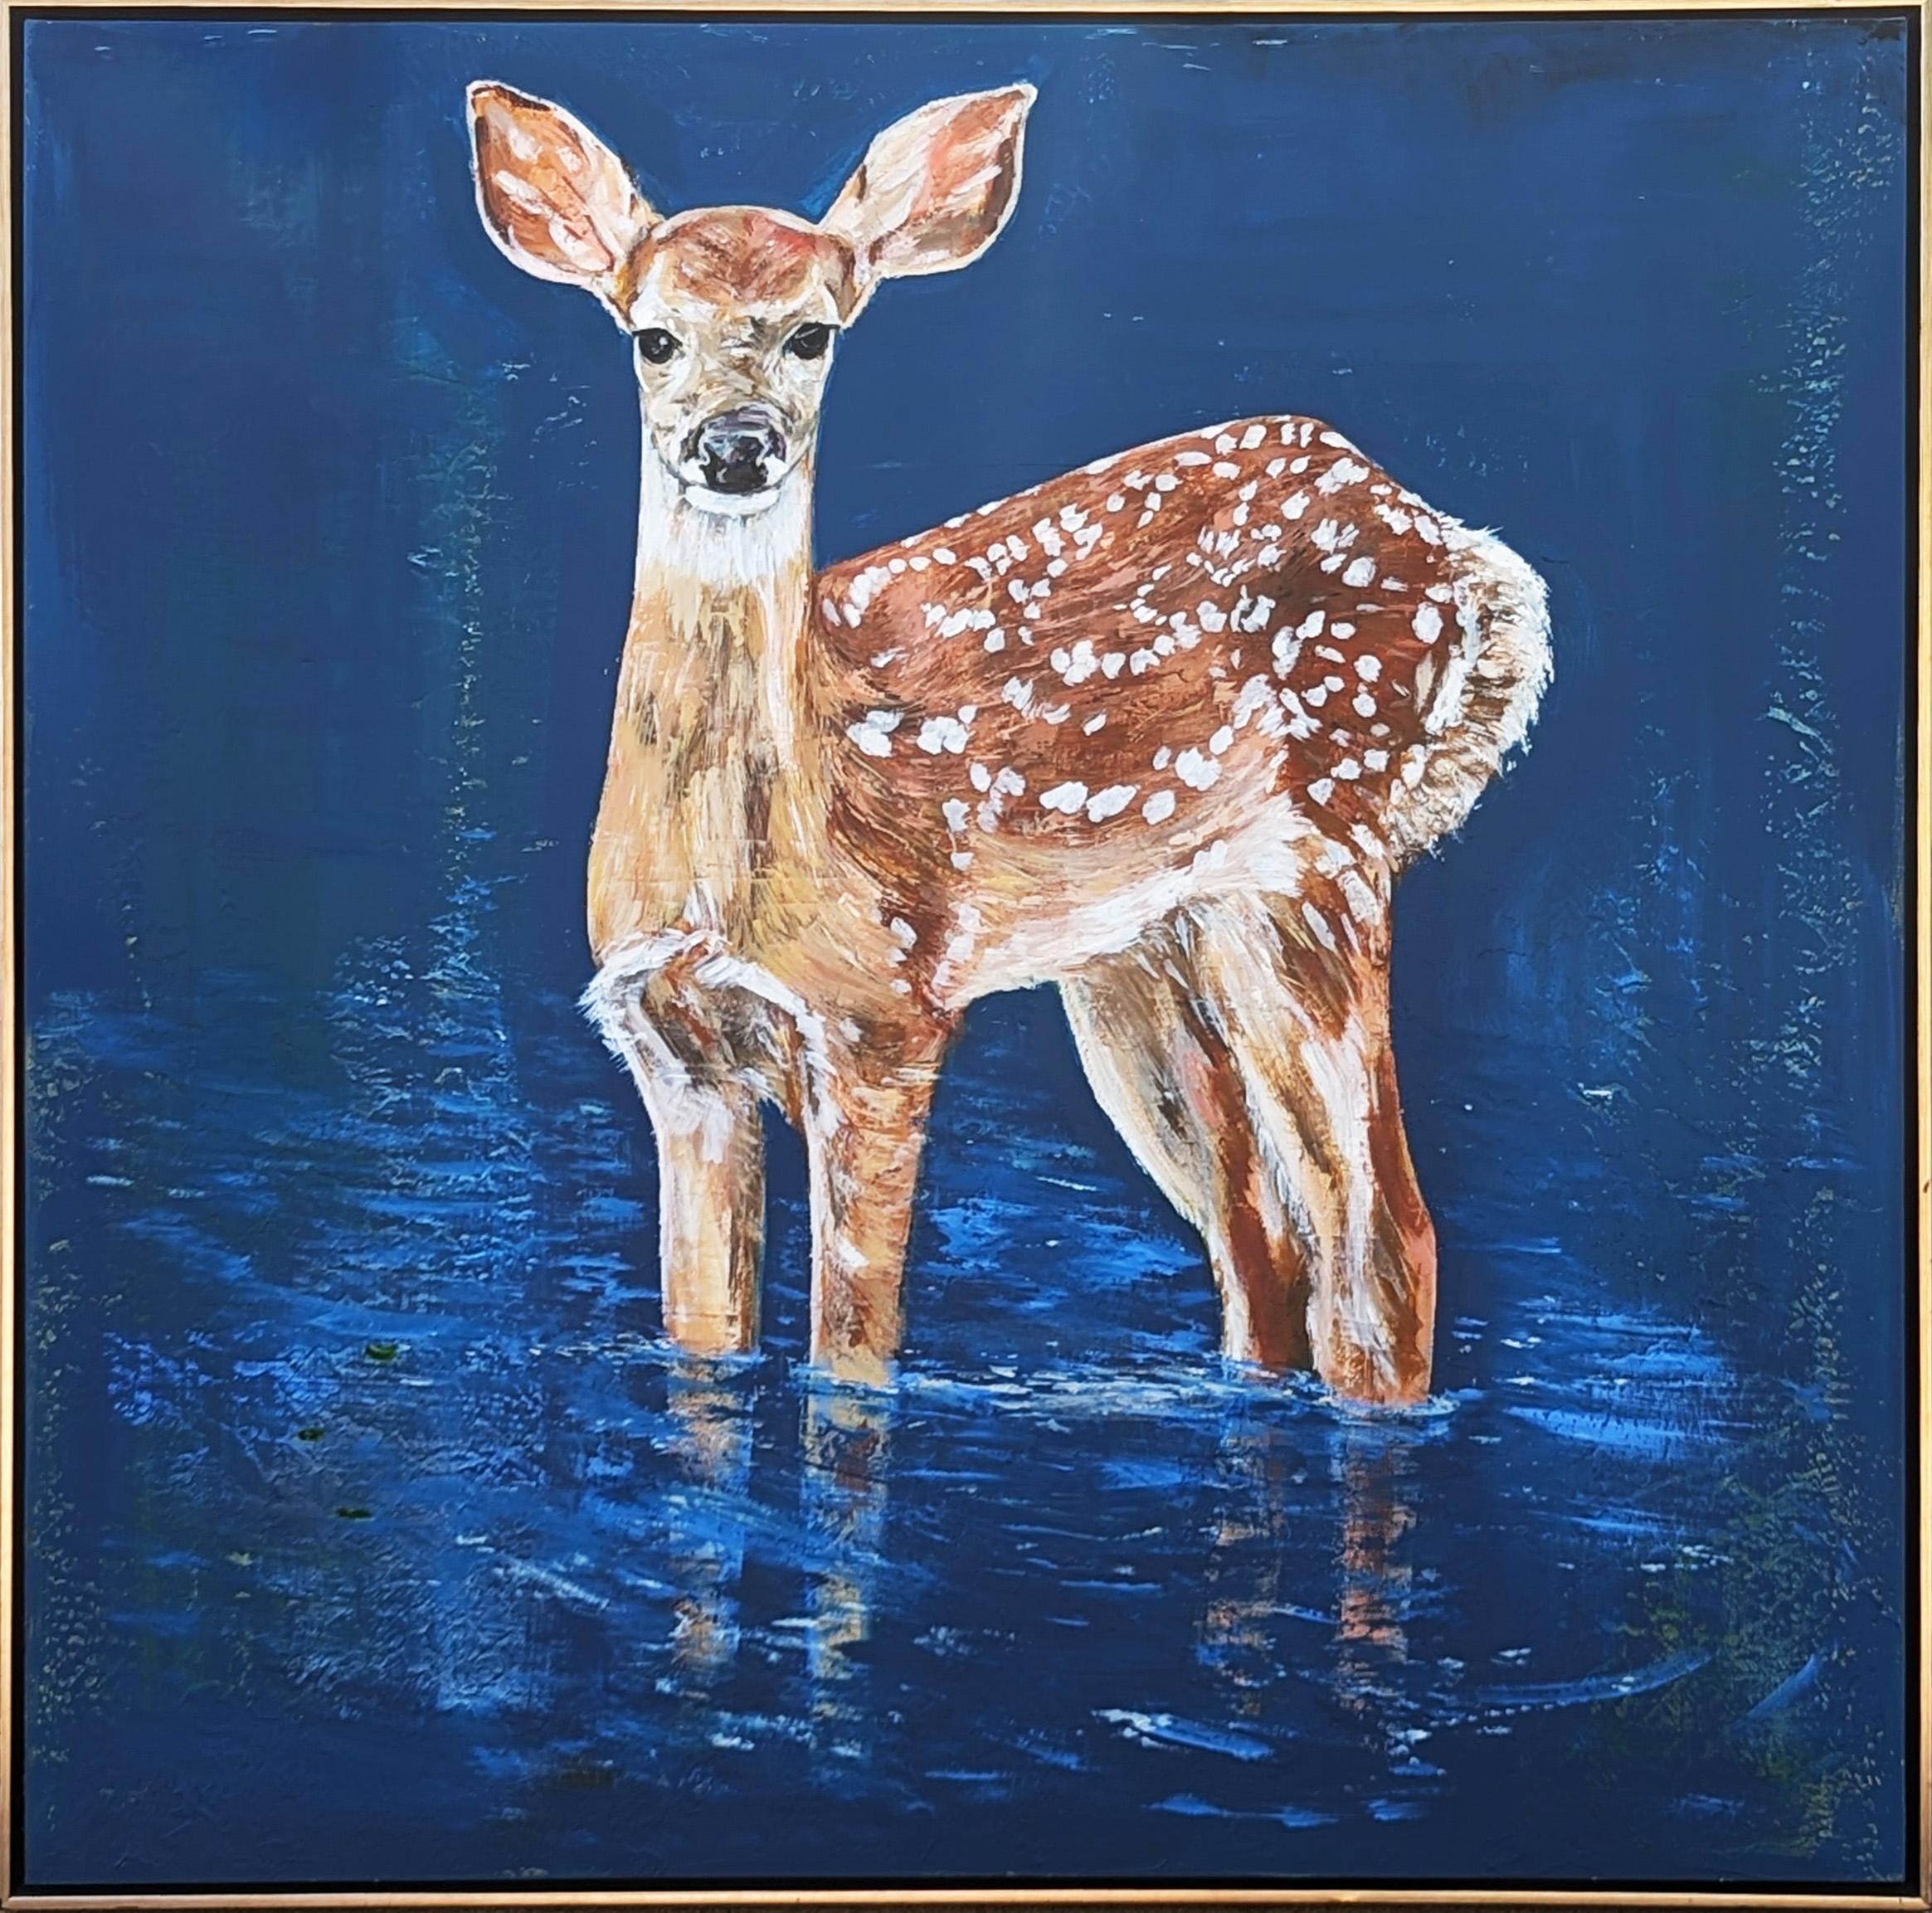 Moisés Villafuerte Animal Painting - Contemporary Naturalistic Blue Toned Landscape Painting of A Deer in Water